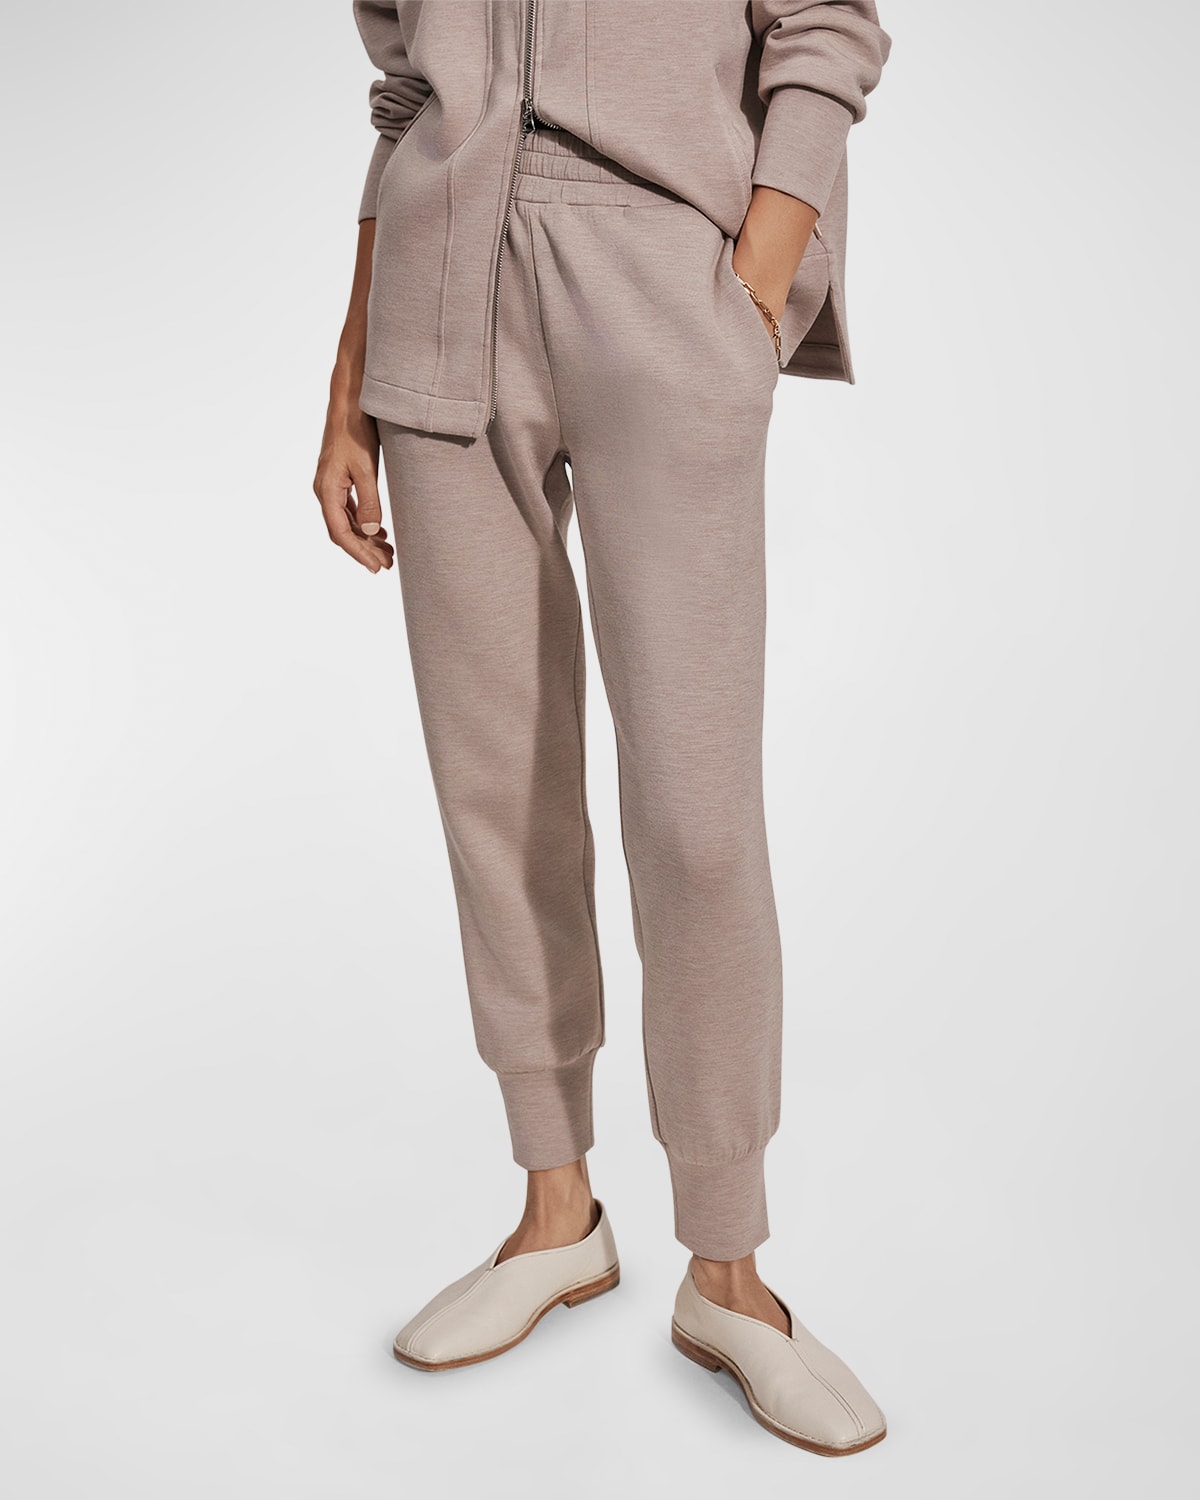 Varley The Slim Cuff Pants In Taupe Marl